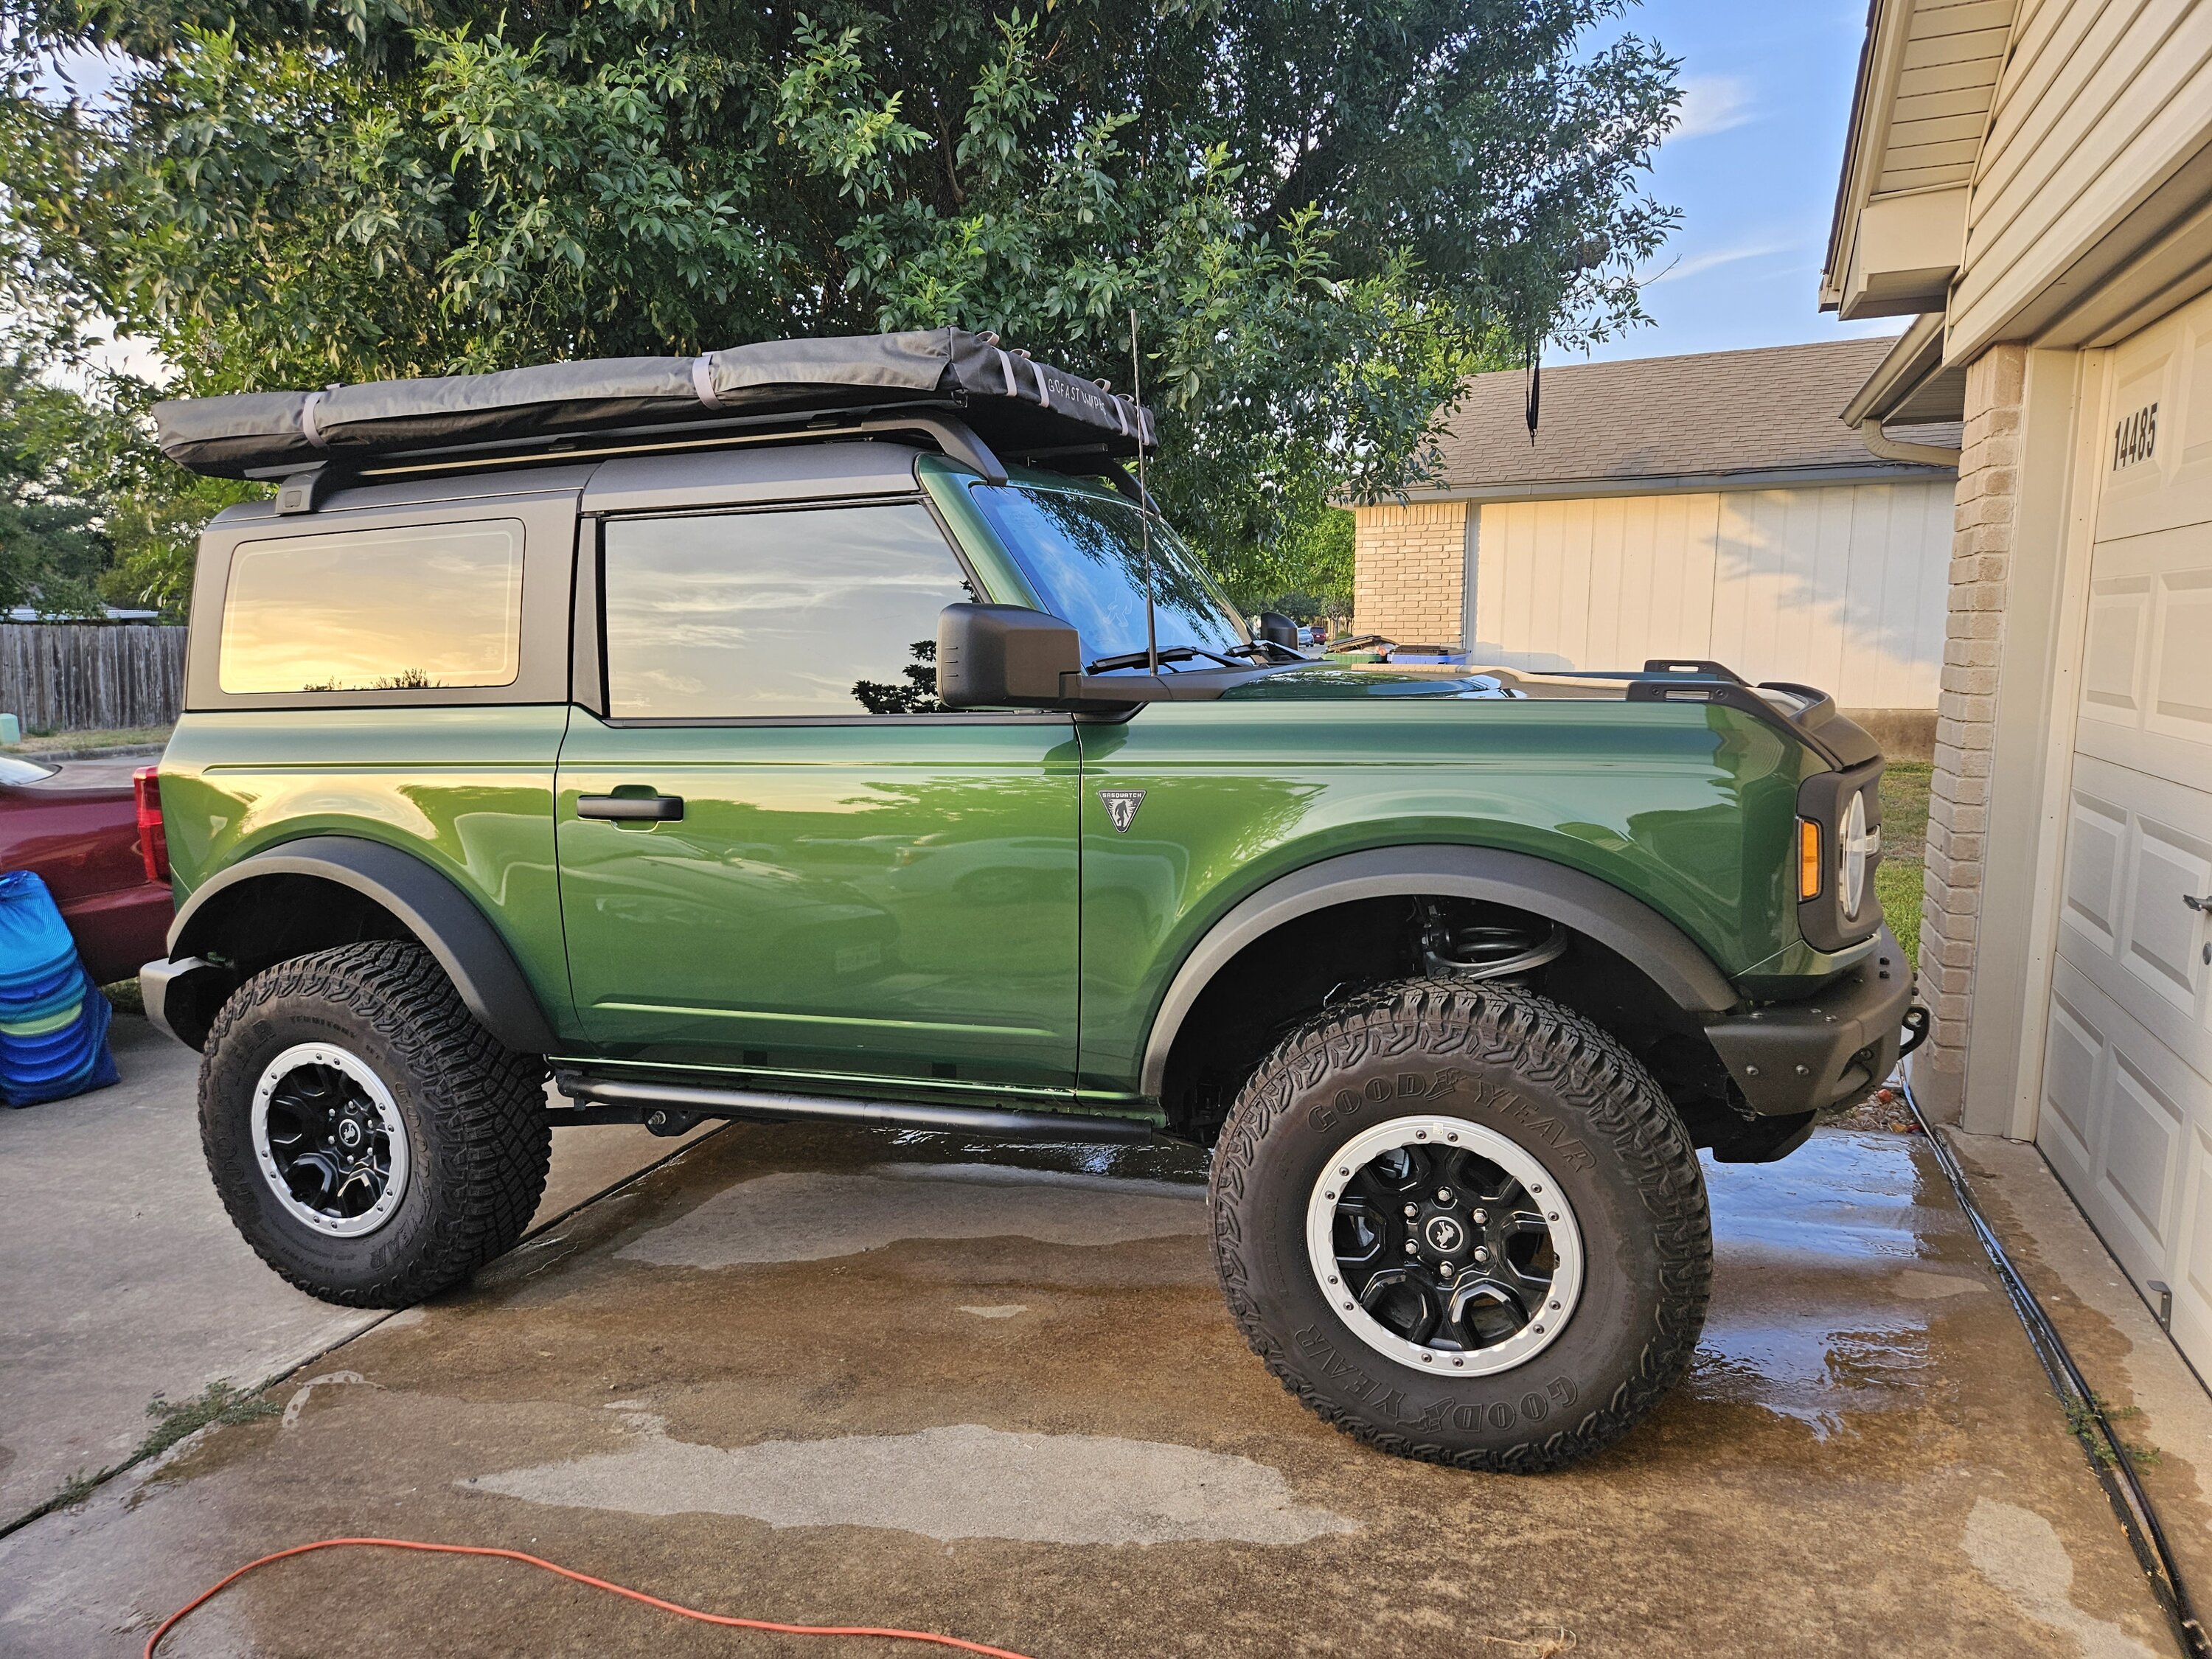 Ford Bronco 2 Door Broncos - What’s on your roof racks? [Photos Thread] 20230716_201042